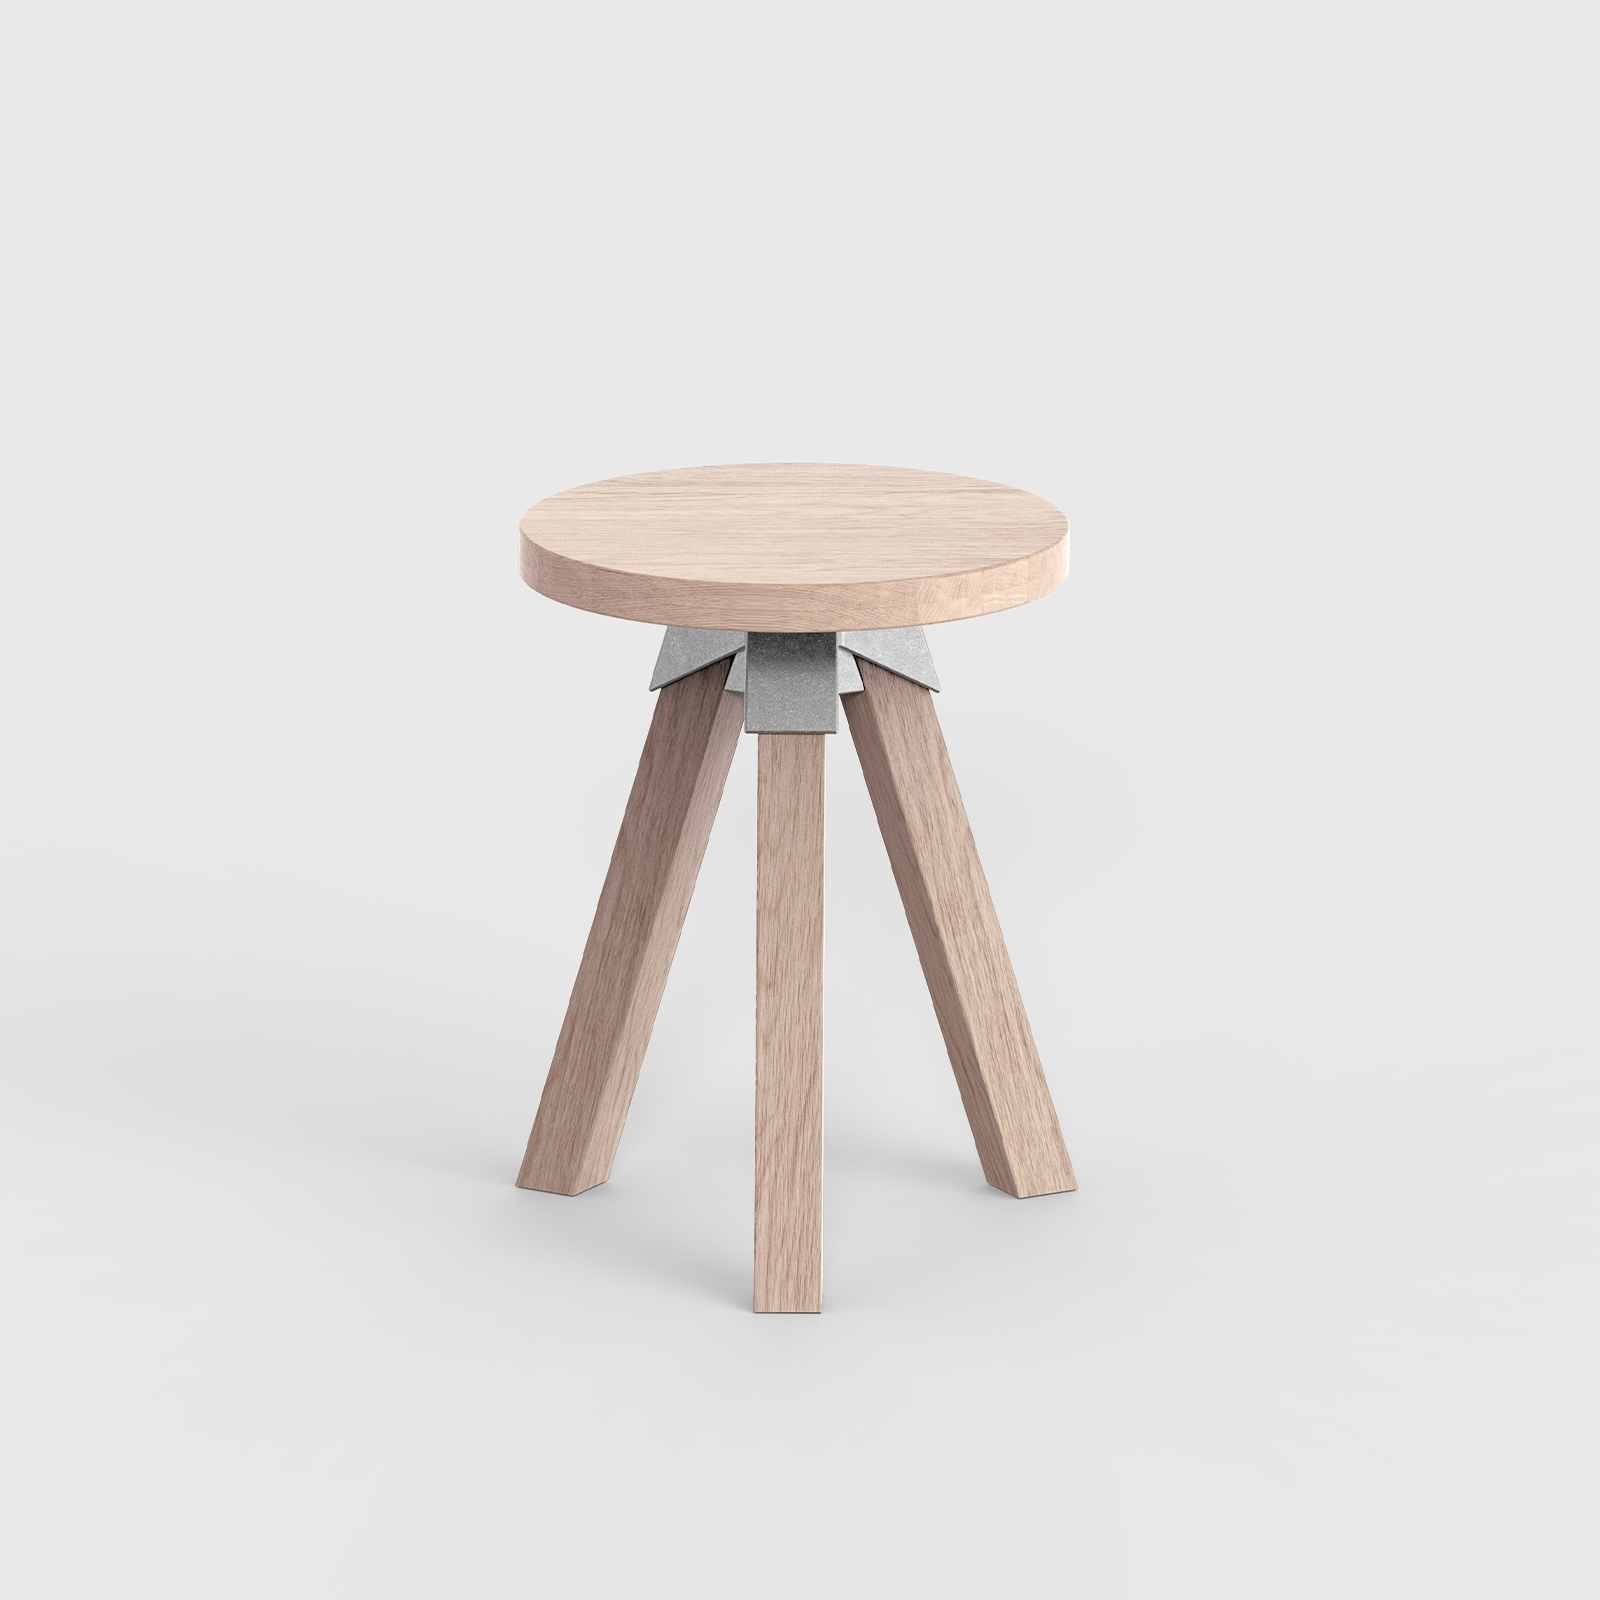 A-joint stool in solid Victorian Ash with cast aluminium A-joint